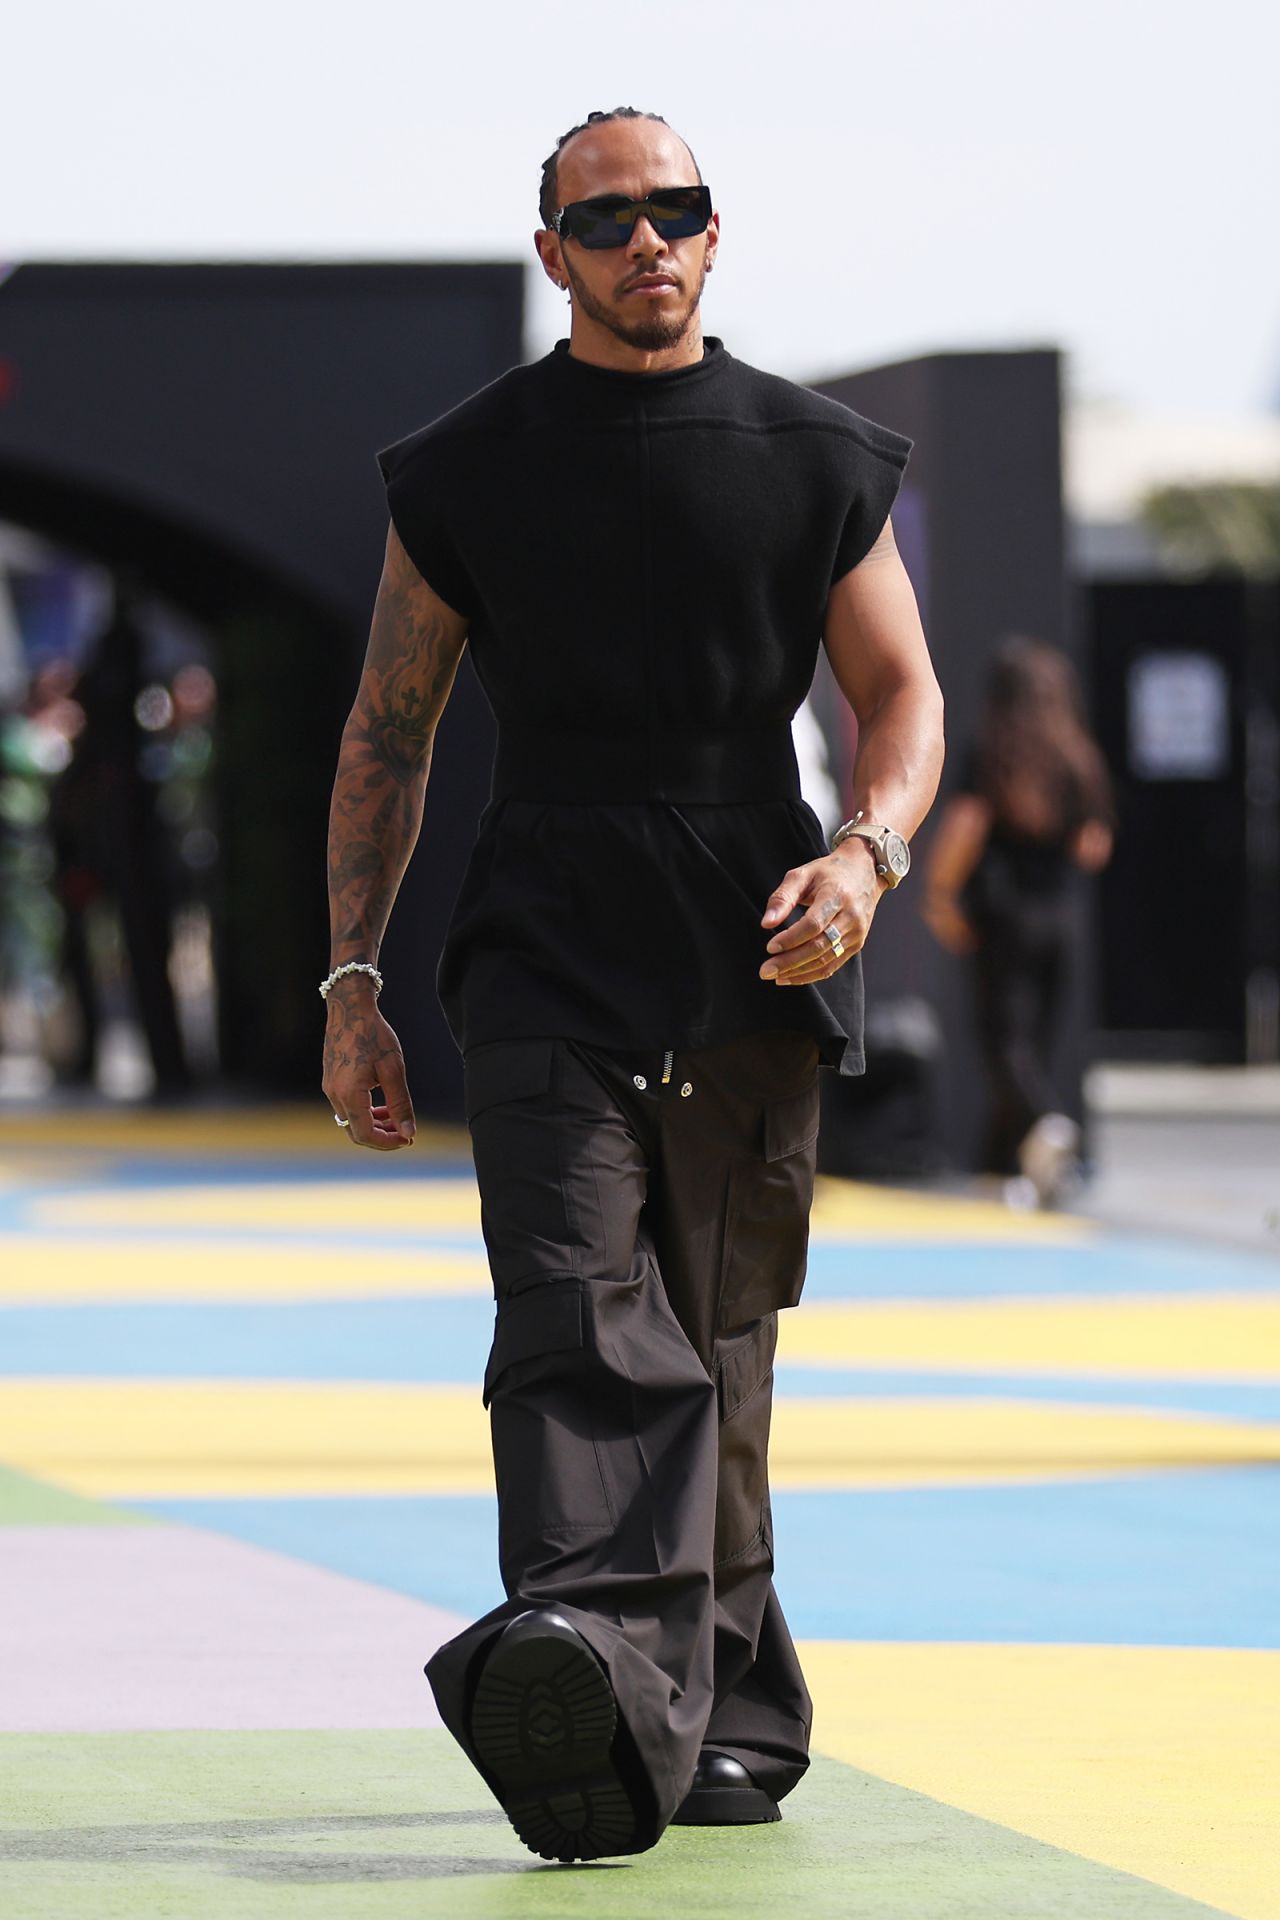 The breadth — and boldness — of Lewis Hamilton's wardrobe would suggest he wants to be a driving force in the fashion world.